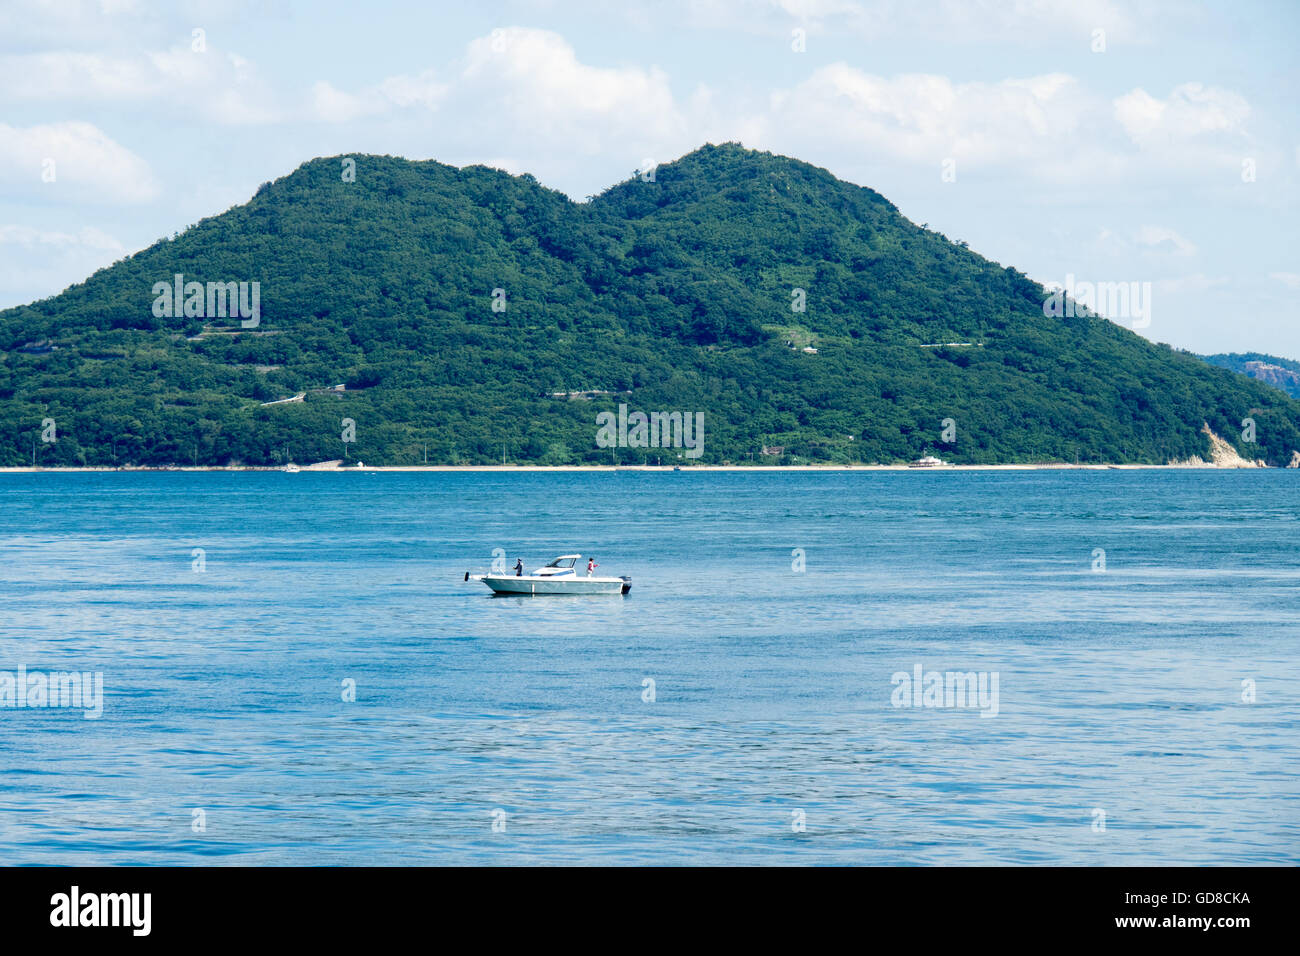 Two fishers fishing from a small boat in the Seto Inland Sea, Japan. Stock Photo